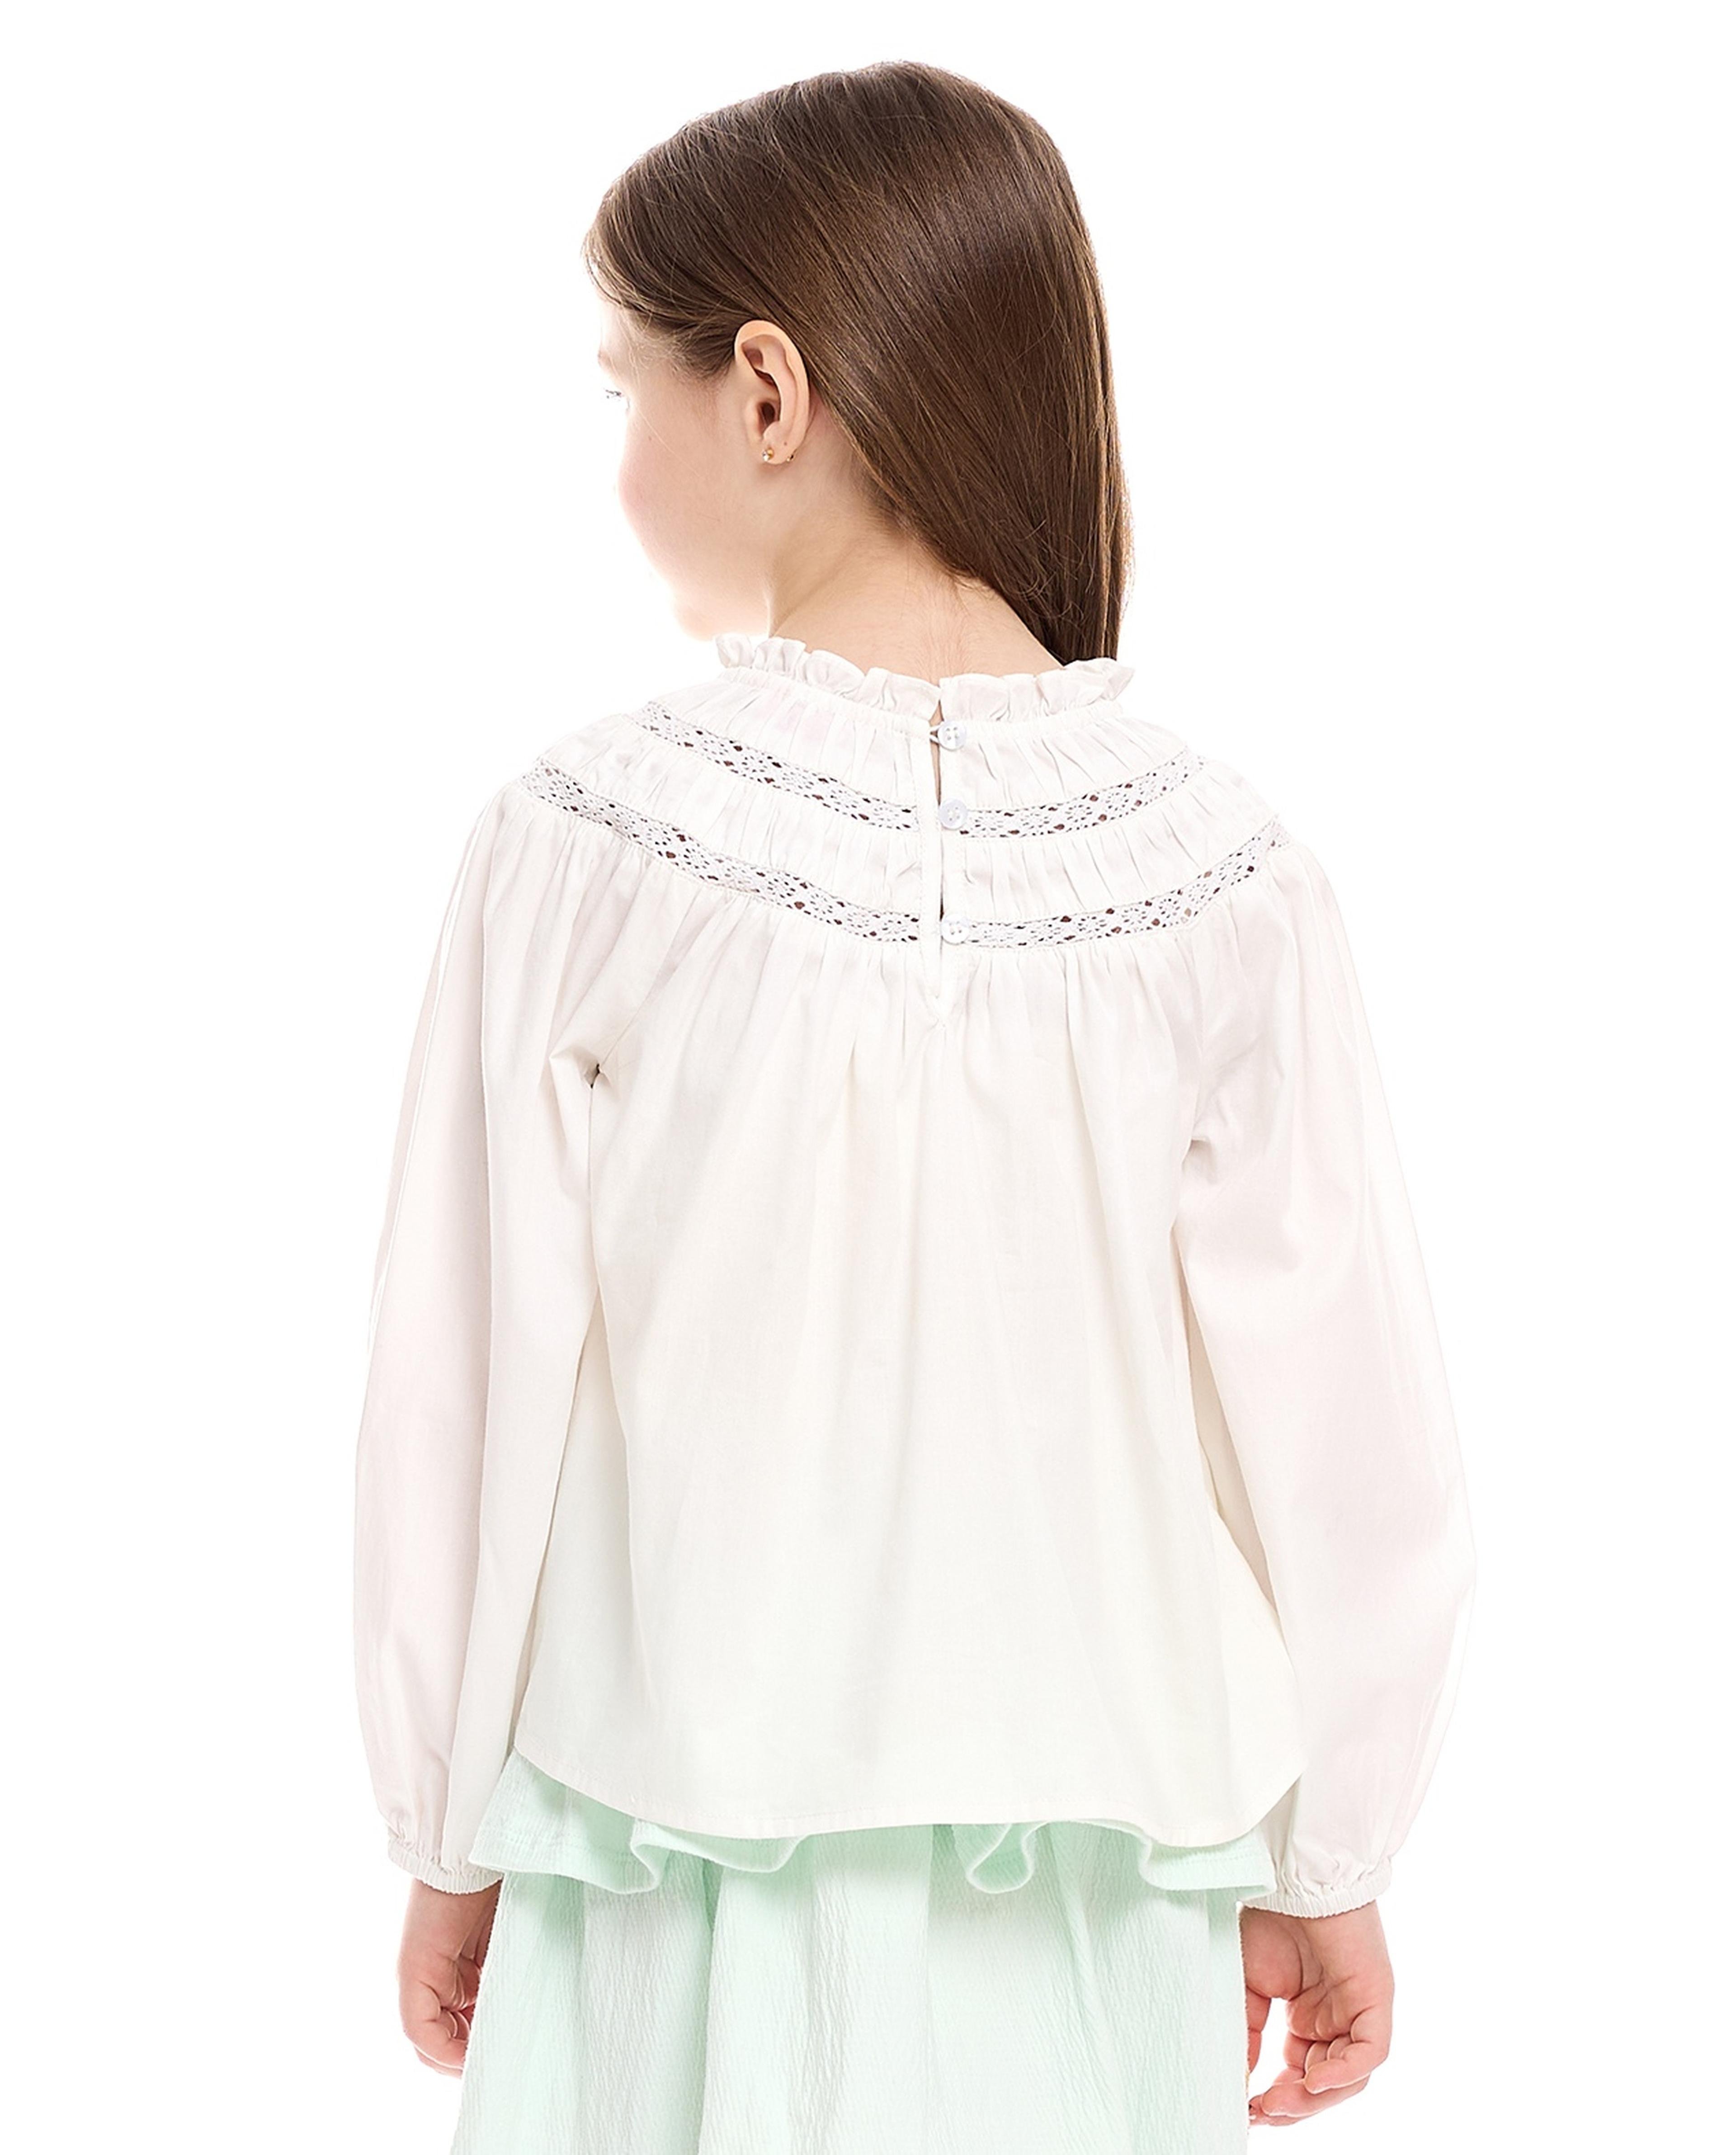 Lace Trim Top with Round Neck and Long Sleeves